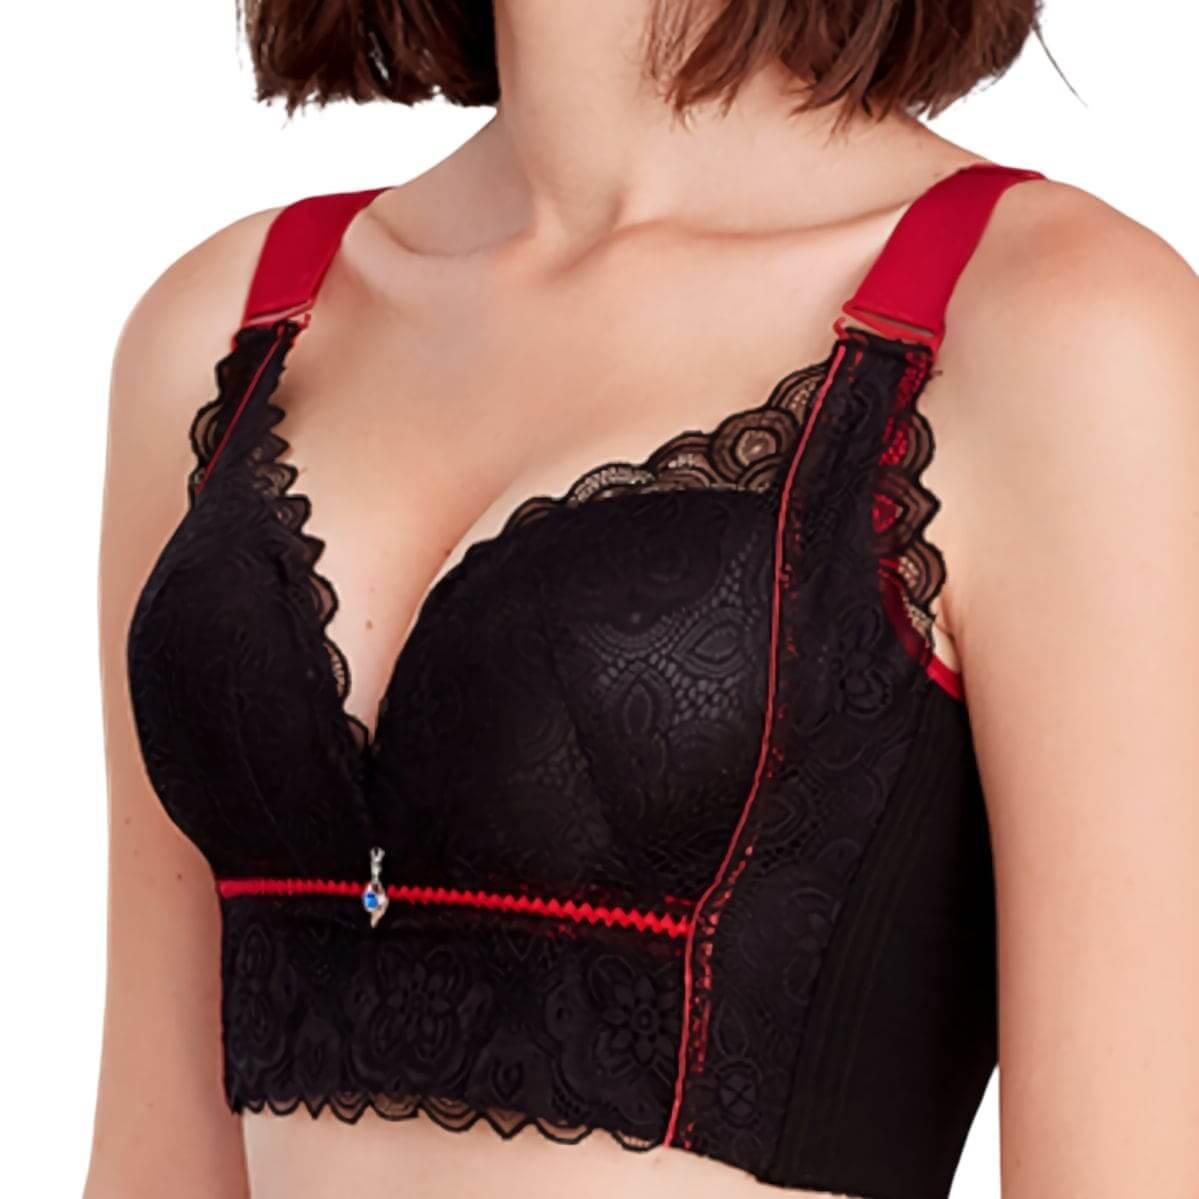 Strap On Lace Bra For Women Comfortable Push Up Bralette For Bikini, Black  Tie Wedding Guest Self Adhesive Silicone Stick In Bra From Beasy112, $13.57